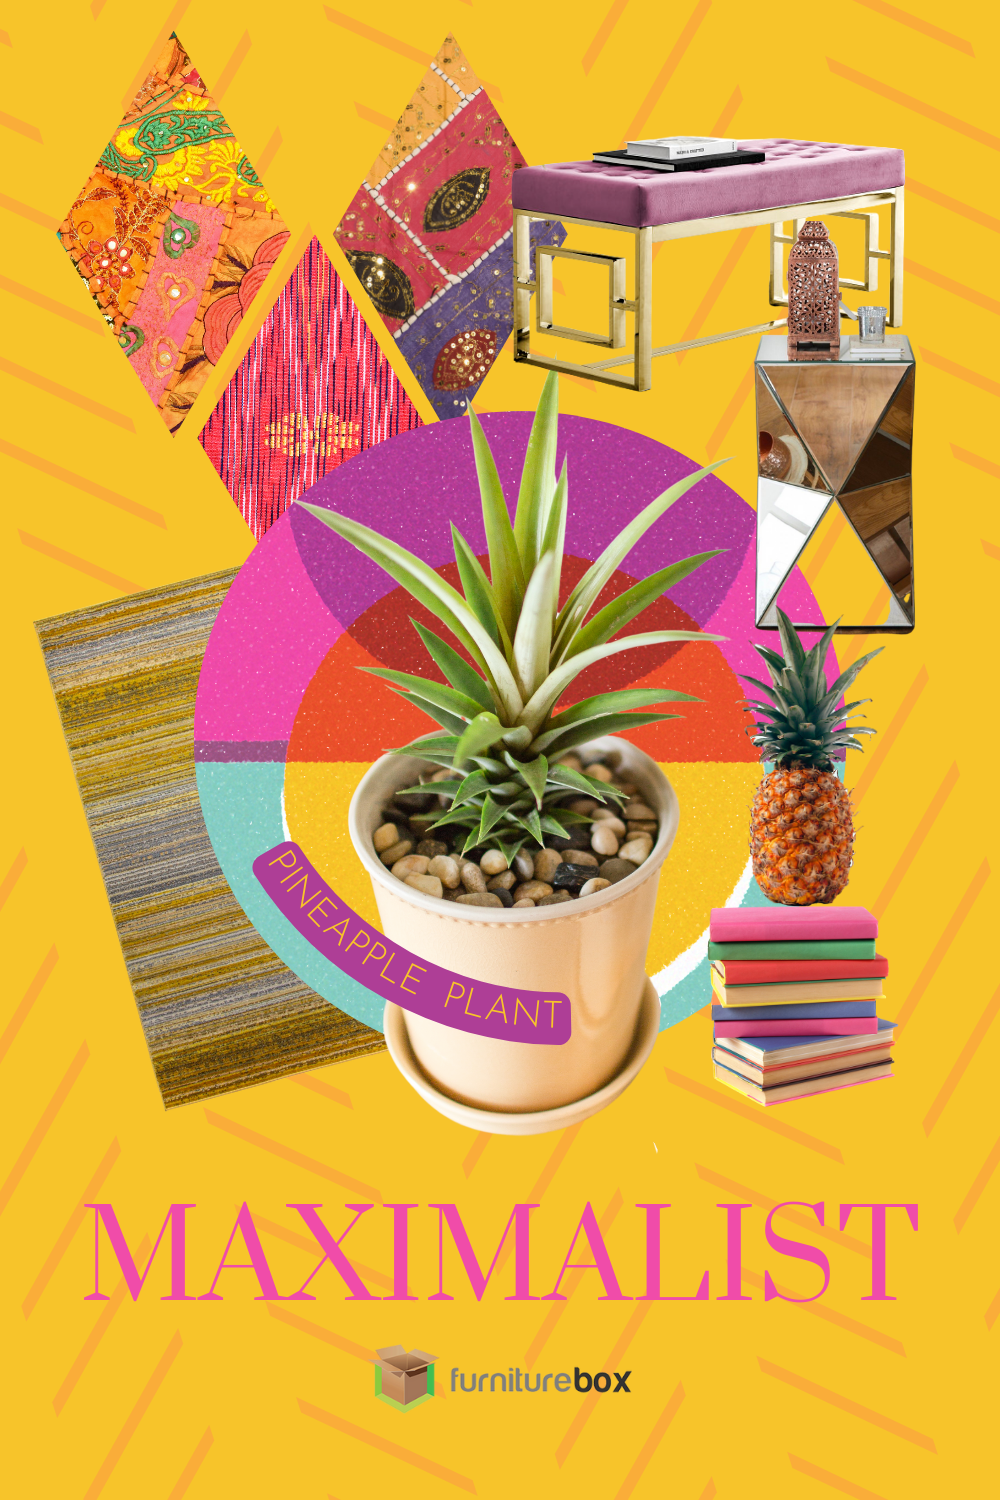 Houseplant interior design for Maximalist style using a pineapple plant and bold colours, patterns and furniture pieces.